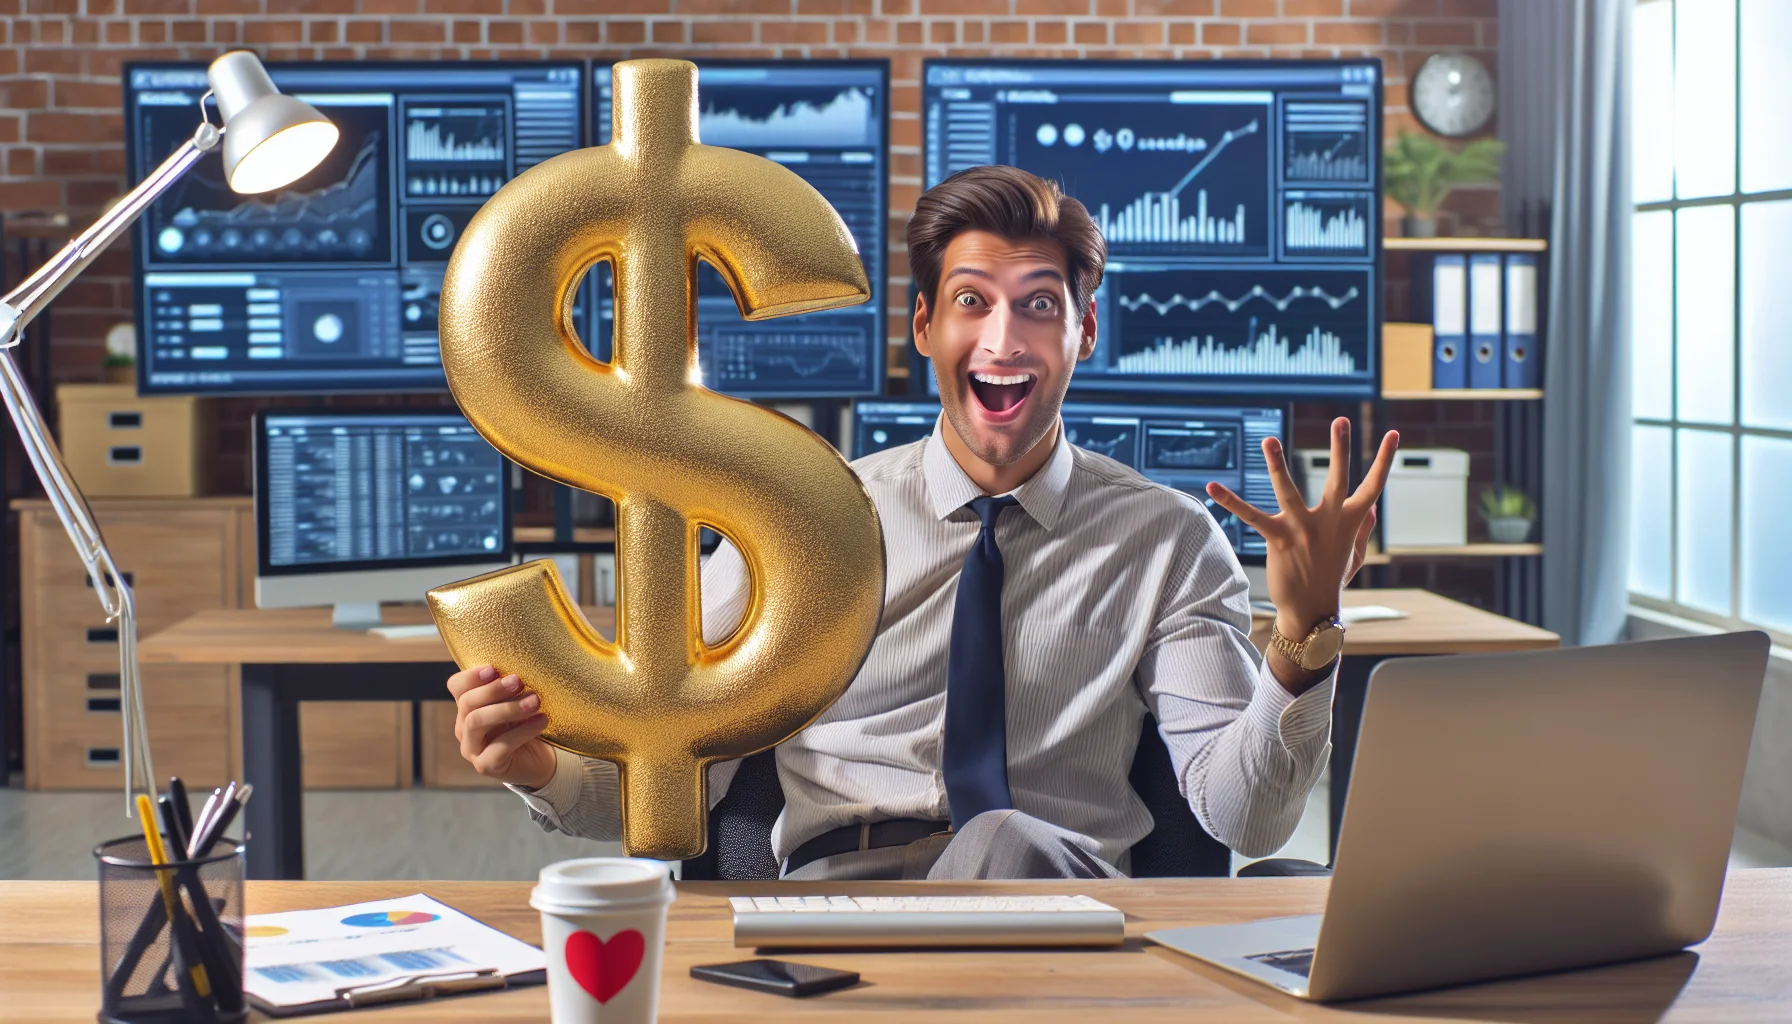 Create a humorous yet realistic scene where an online affiliate, excitedly presenting a large, shiny golden dollar sign. The affiliate could be Caucasian male in his 30s, wearing smart casual attire, sitting in a modern, well-lit home office filled with multiple computer screens displaying various charts and graphs related to online revenue generation. There could also be a quirky detail, like a small coffee cup that has the phrase 'I Heart Affiliates' written on it.